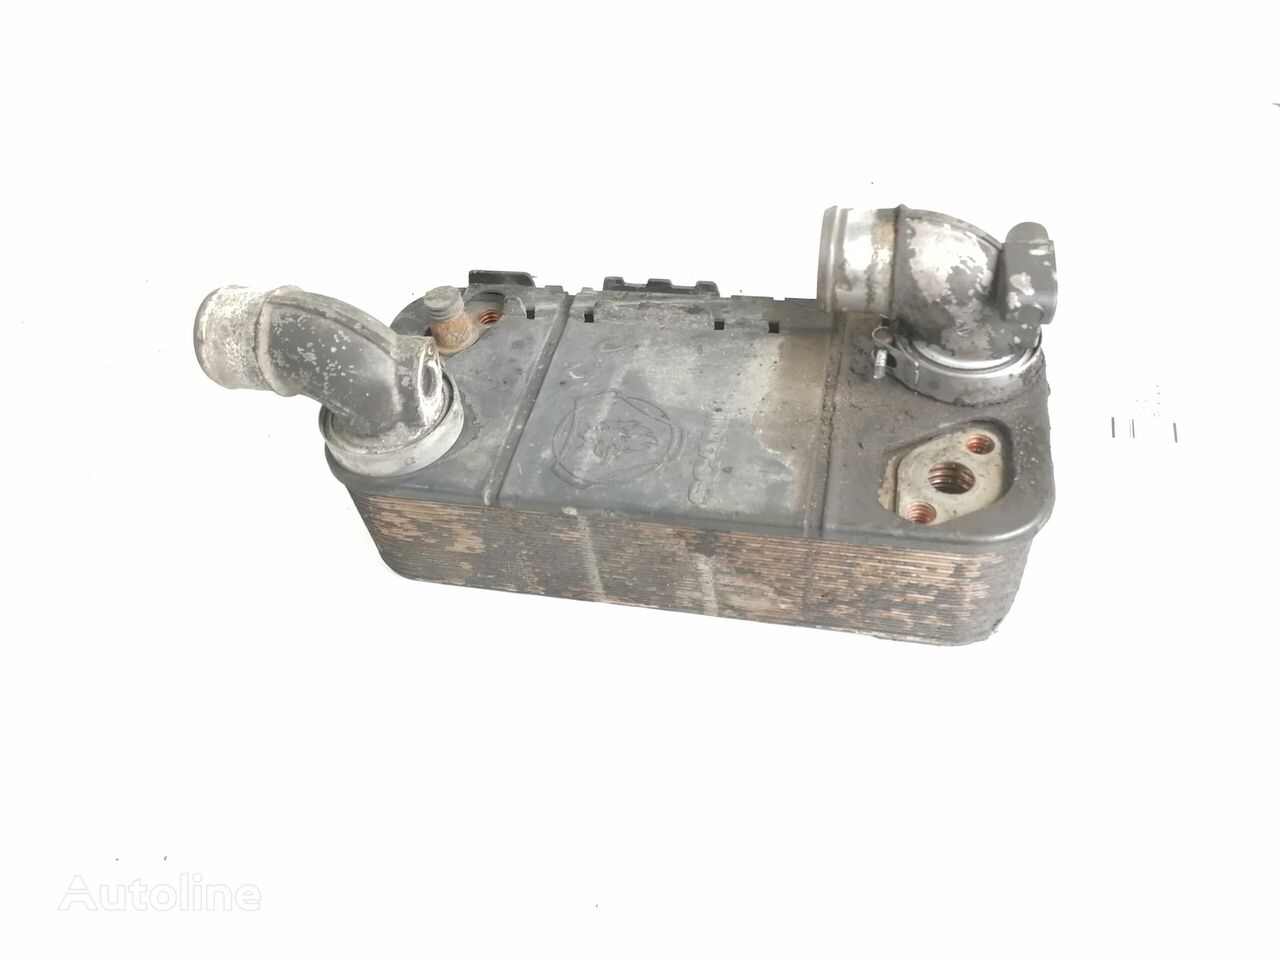 Scania Retarder cooling 1804210 brake caliper for Scania R480 truck tractor